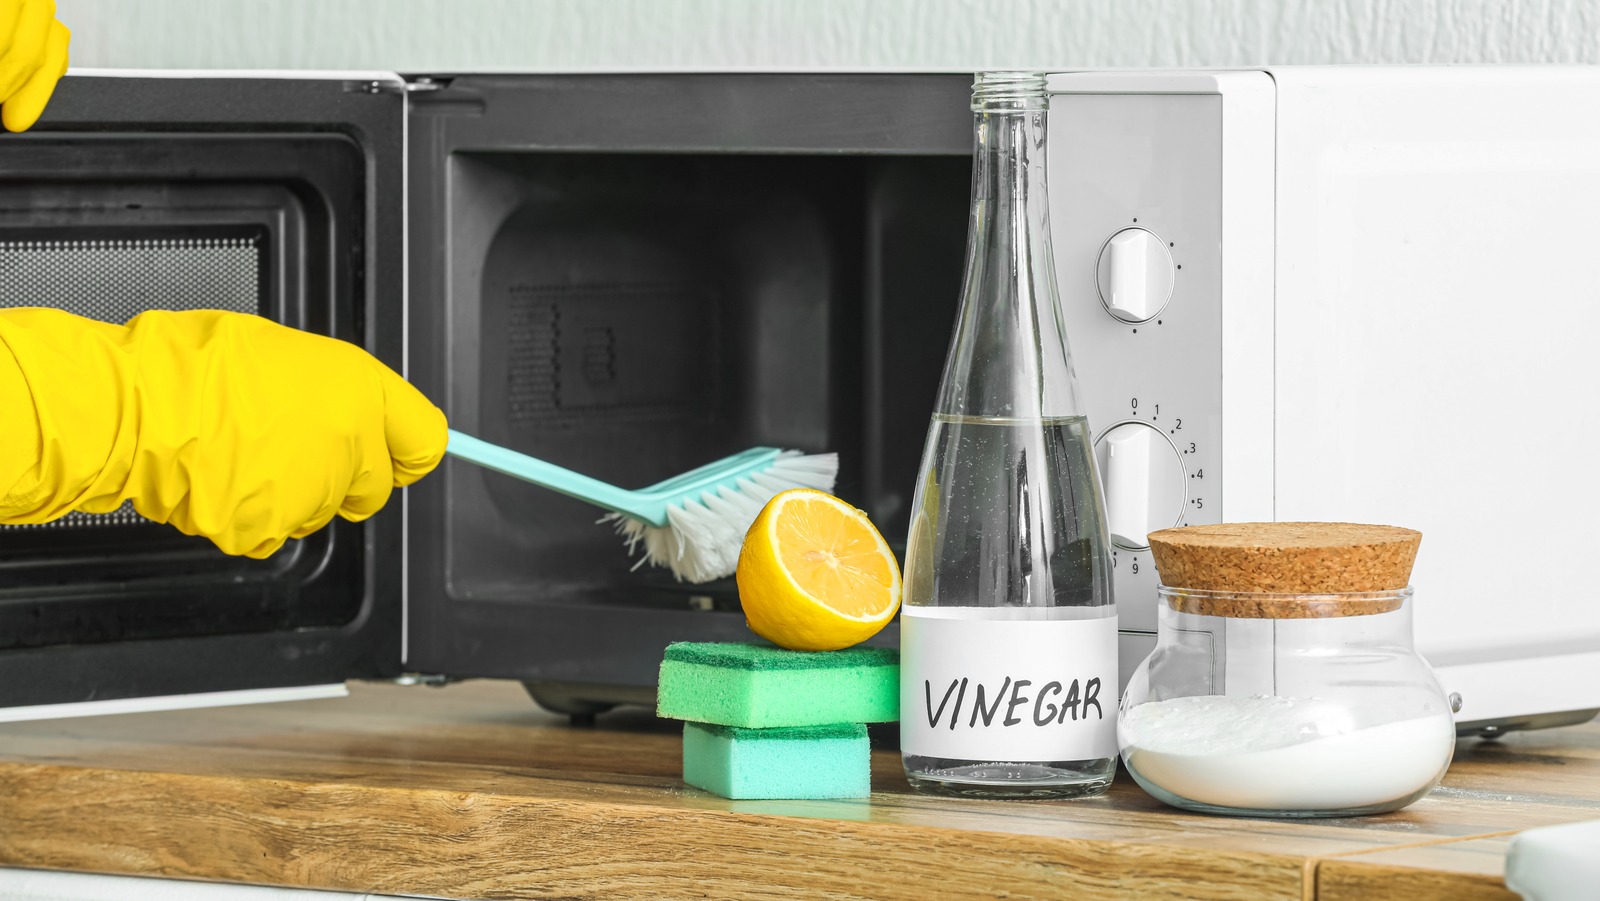 https://www.thedailymeal.com/img/gallery/how-to-clean-your-microwave-with-vinegar-and-citrus-fruits/l-intro-1690401758.jpg